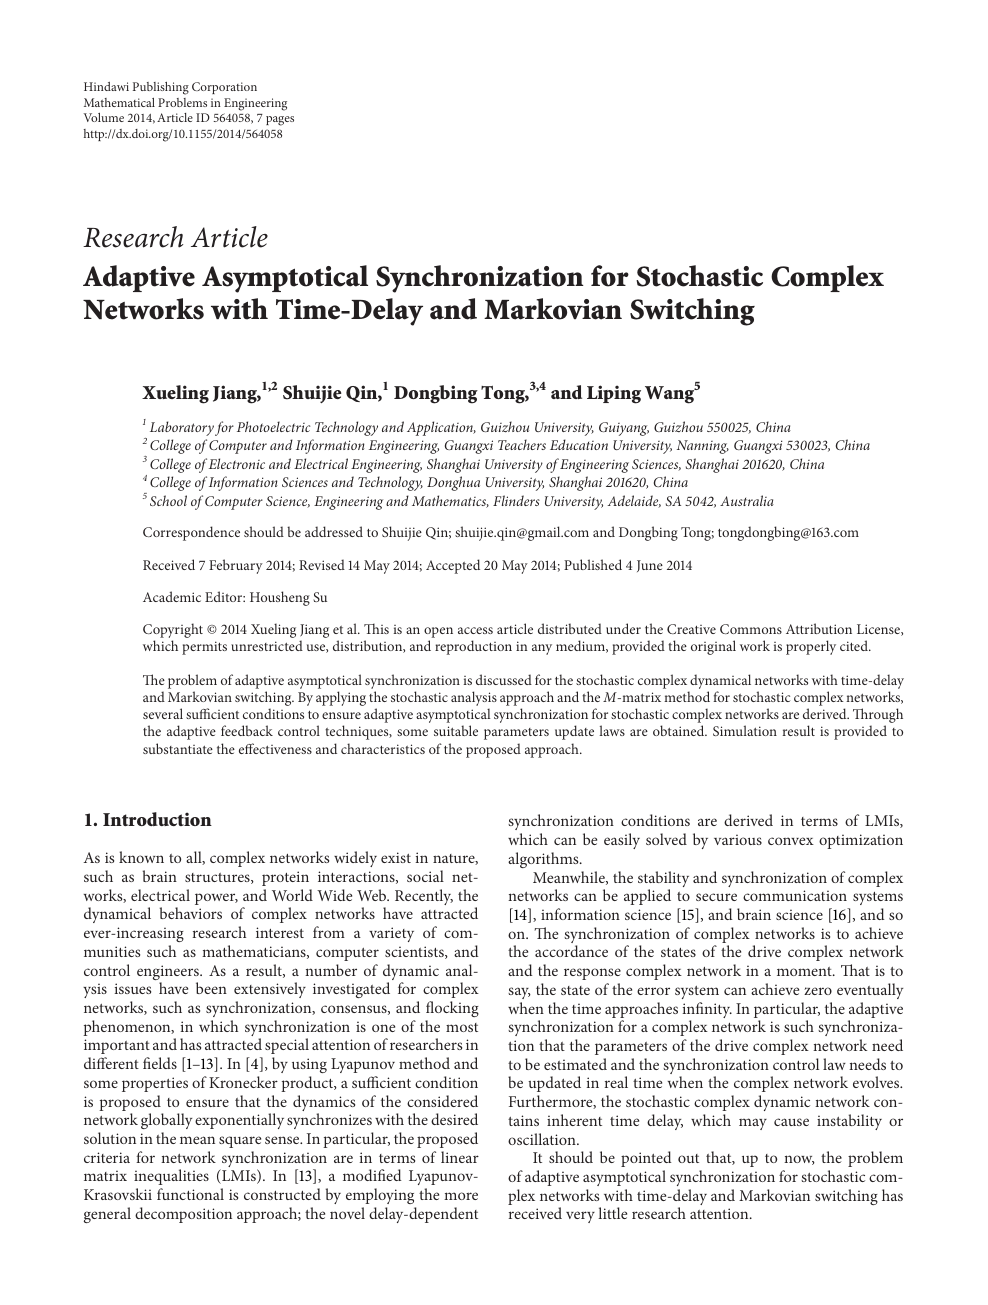 Adaptive Asymptotical Synchronization For Stochastic Complex Networks With Time Delay And Markovian Switching Topic Of Research Paper In Mathematics Download Scholarly Article Pdf And Read For Free On Cyberleninka Open Science Hub